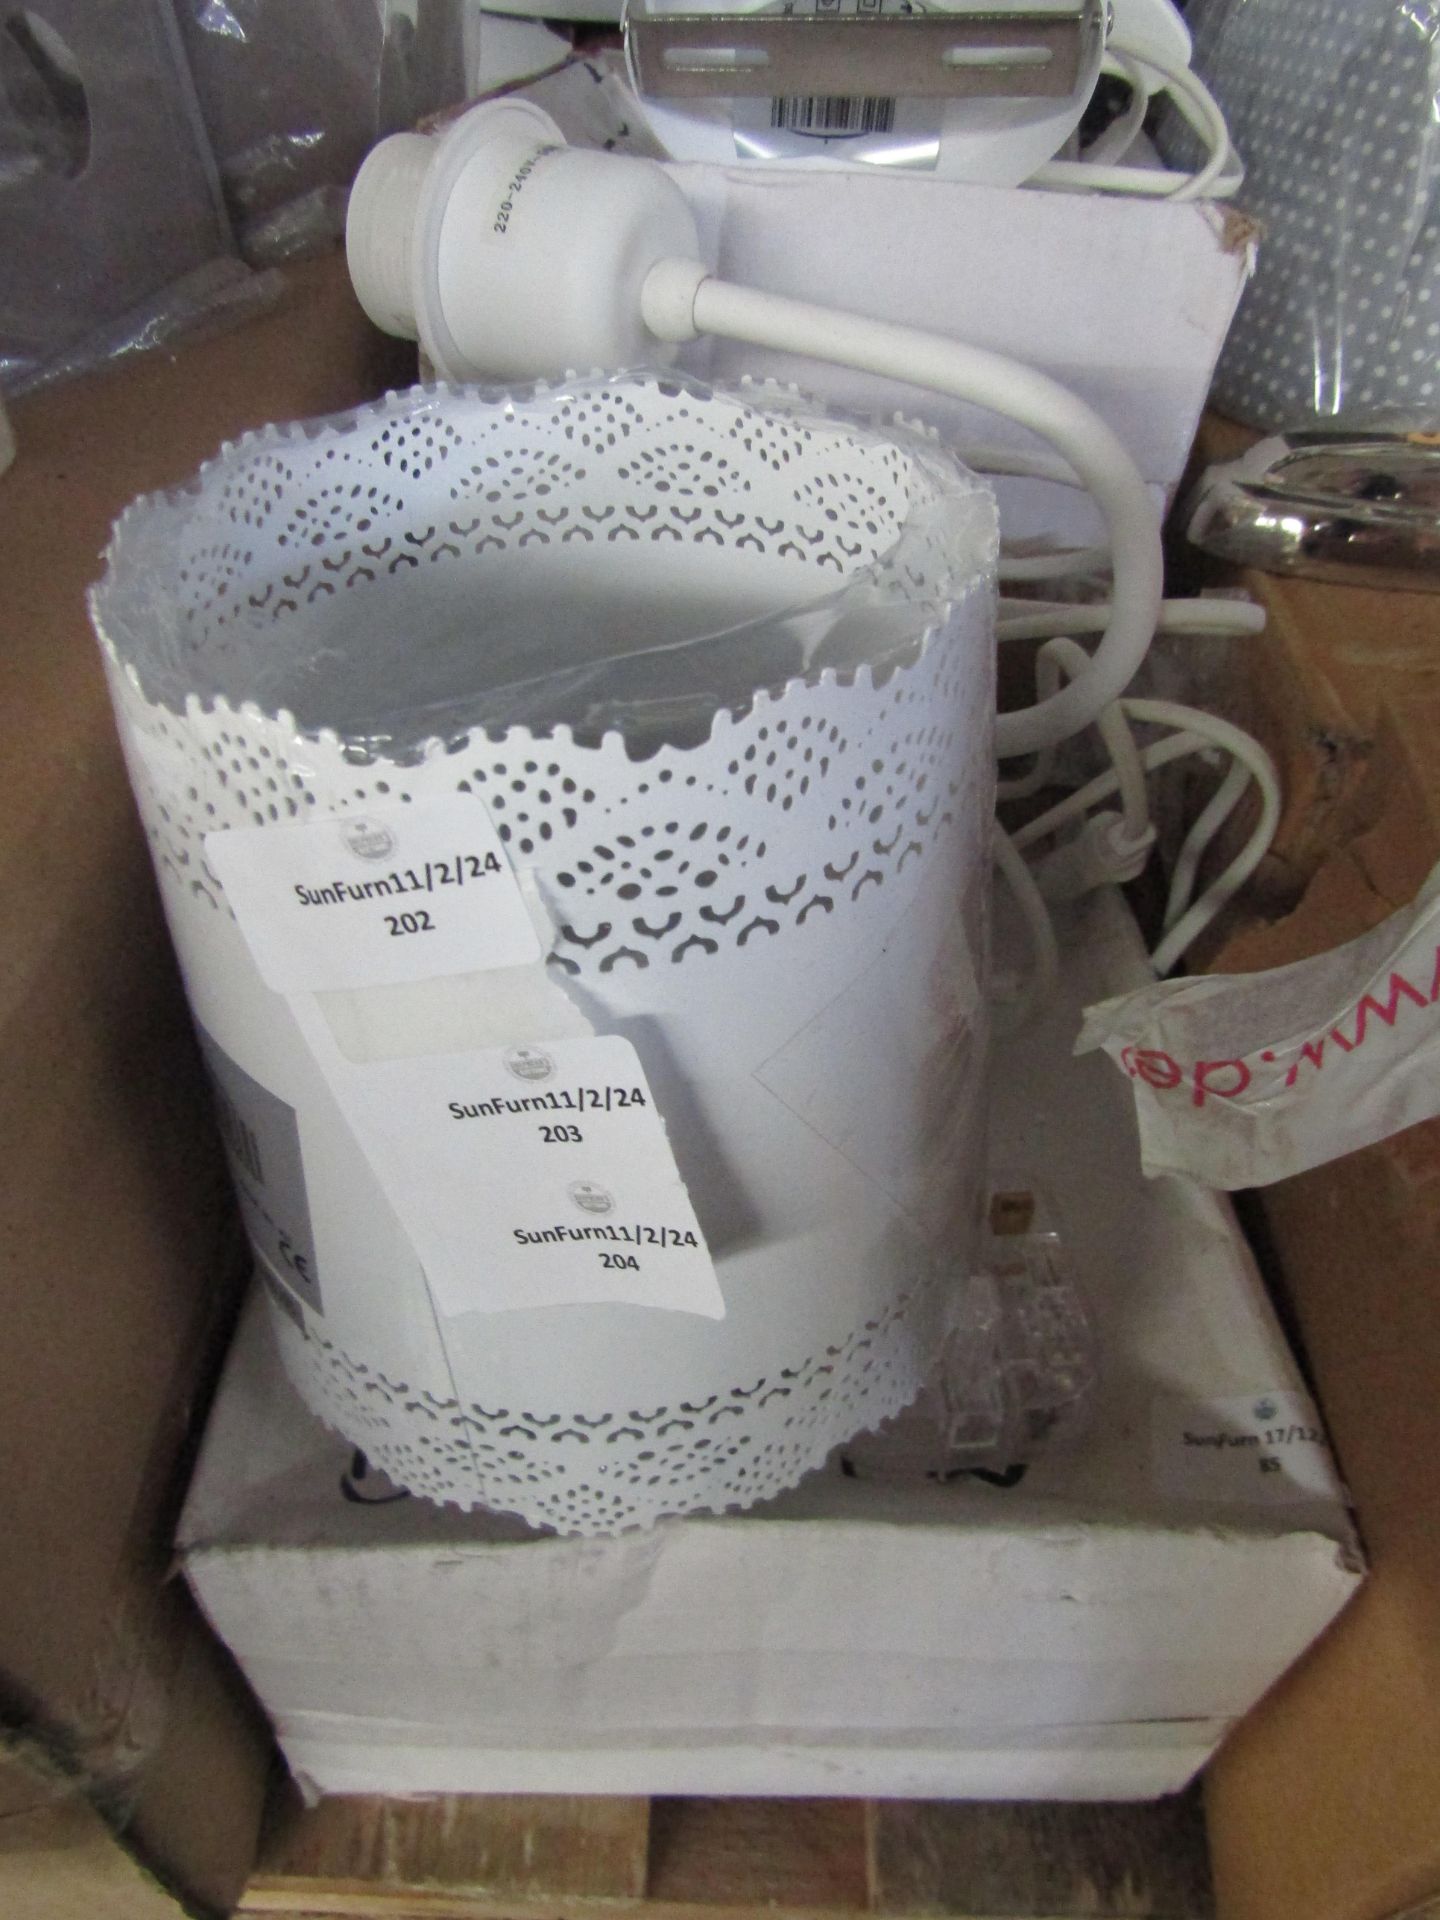 Lace Metal Wall Light White. Size: H15 x 11cm - RRP ?65.00 - New & Boxed. (DR810)